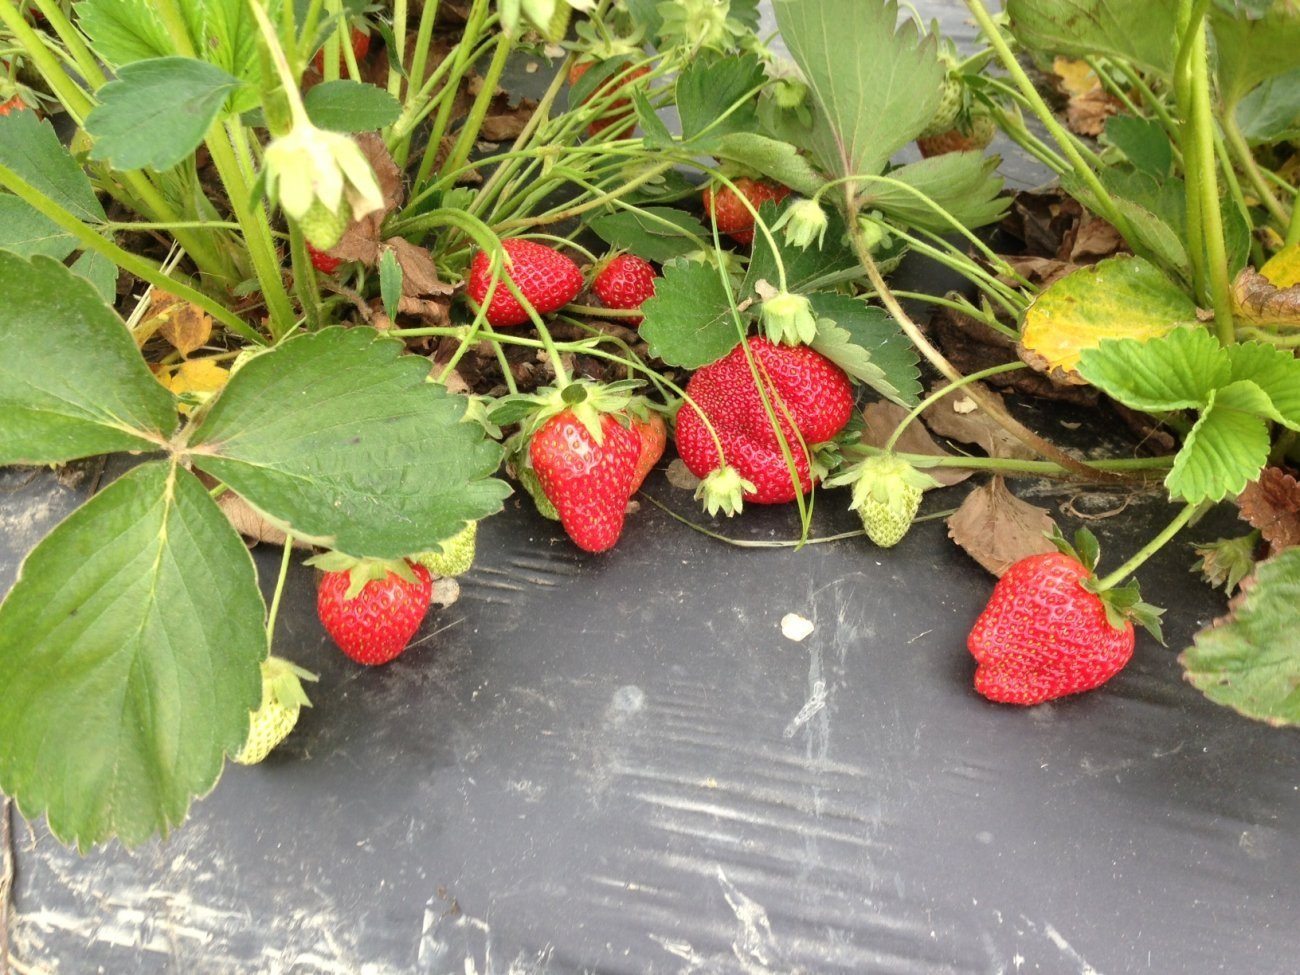 Ripe strawberries on plasticulture mulch ready for you-pick.